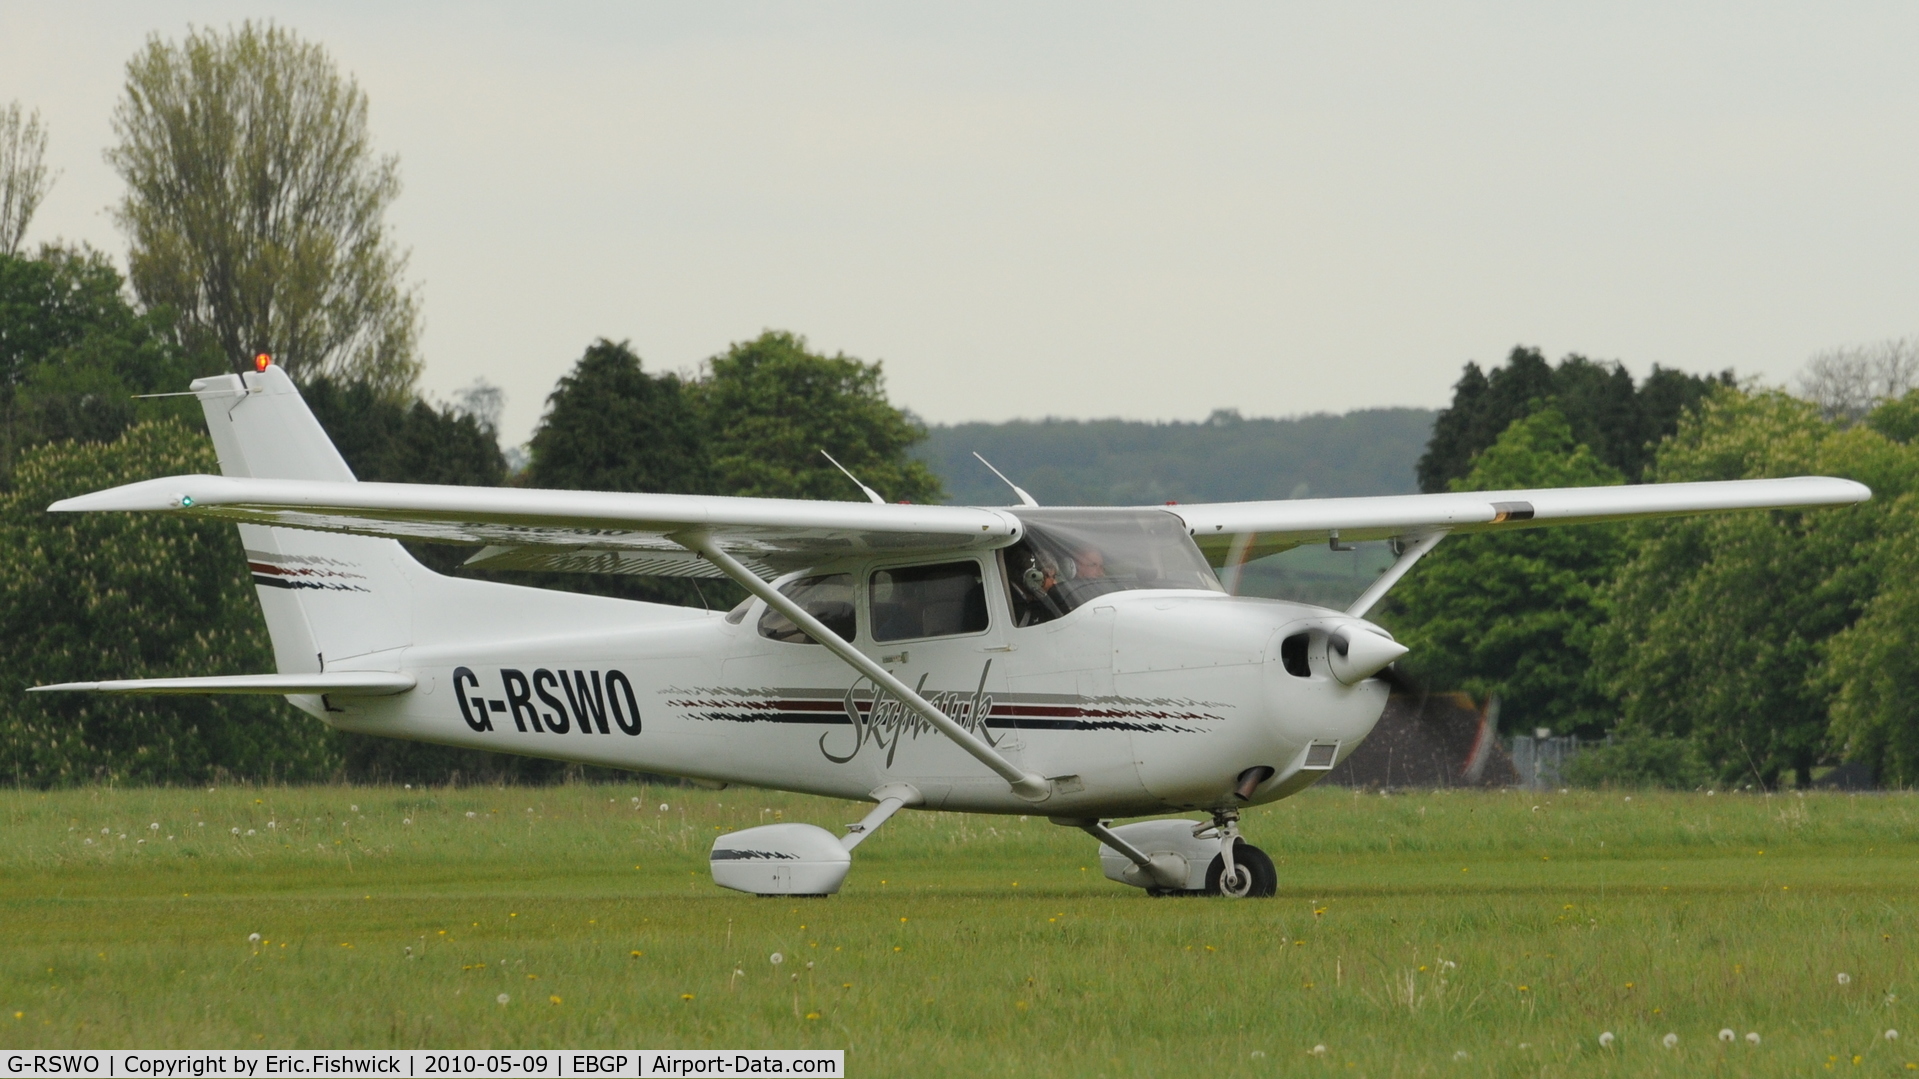 G-RSWO, 1997 Cessna 172R C/N 17280206, G-RSWO at Kemble Airport (Great Vintage Flying Weekend)